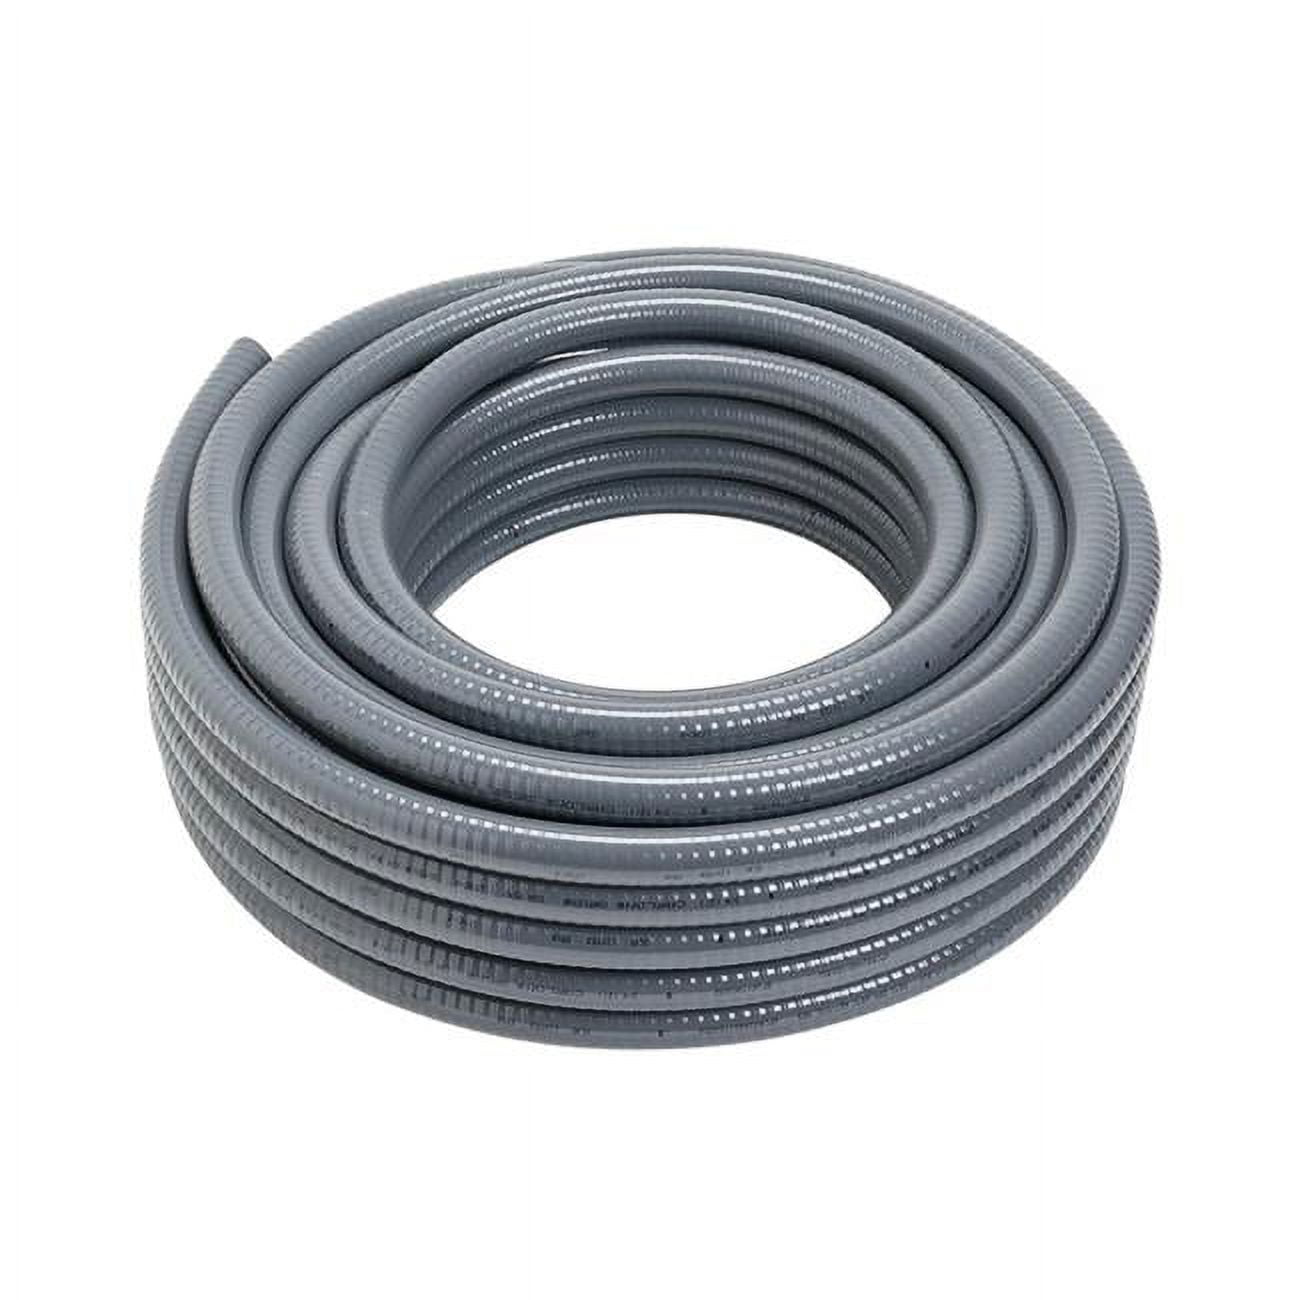 Picture of Carlon 3565272 0.5 in. Dia. x 25 ft. PVC Flexible Electrical Conduit for LFNC-B - Gray